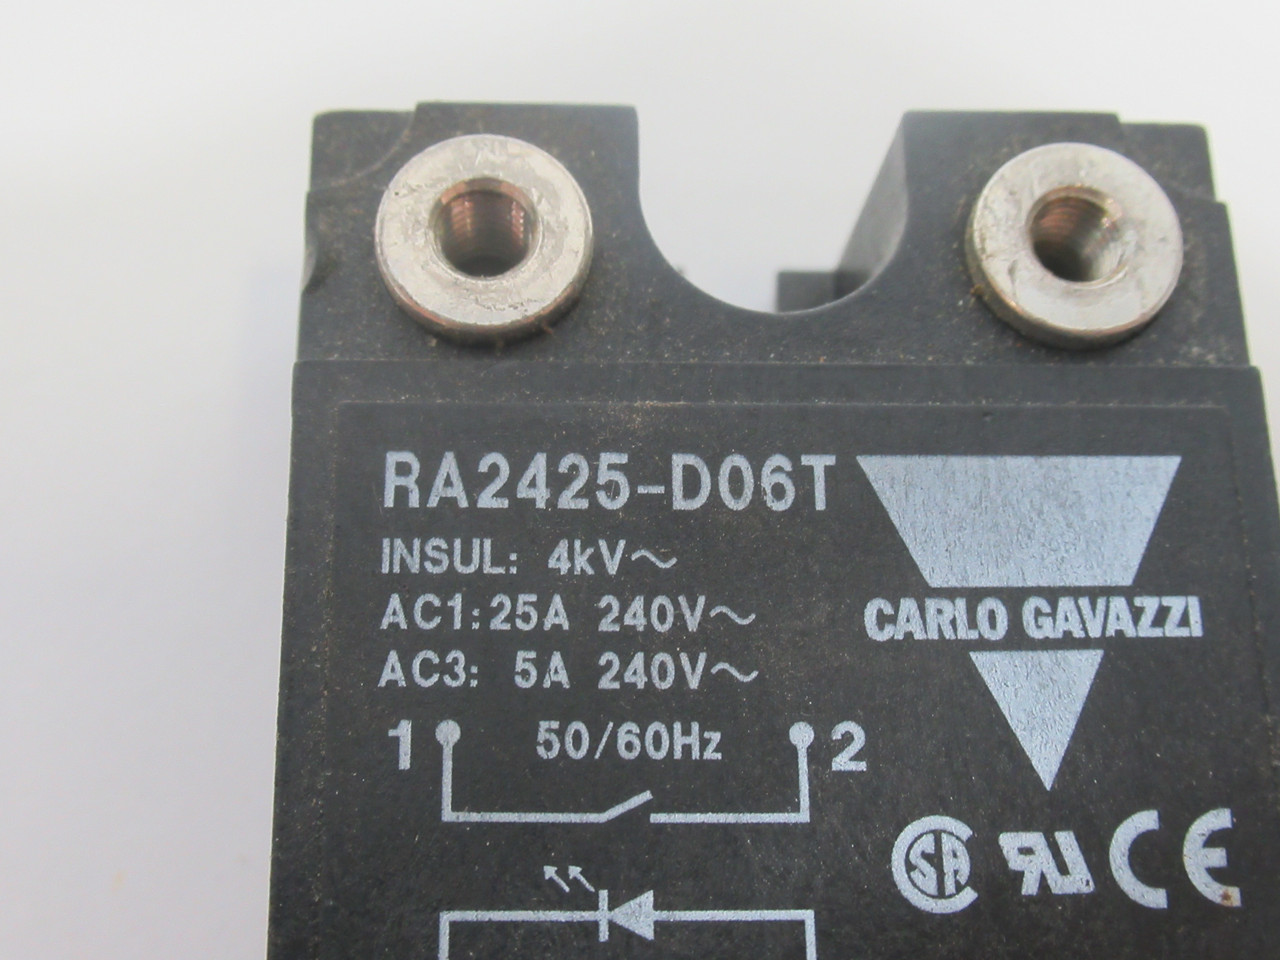 Carlo Gavazzi RA2425-D06T Solid State Relay 4KV 240V 25A NO SCREWS USED